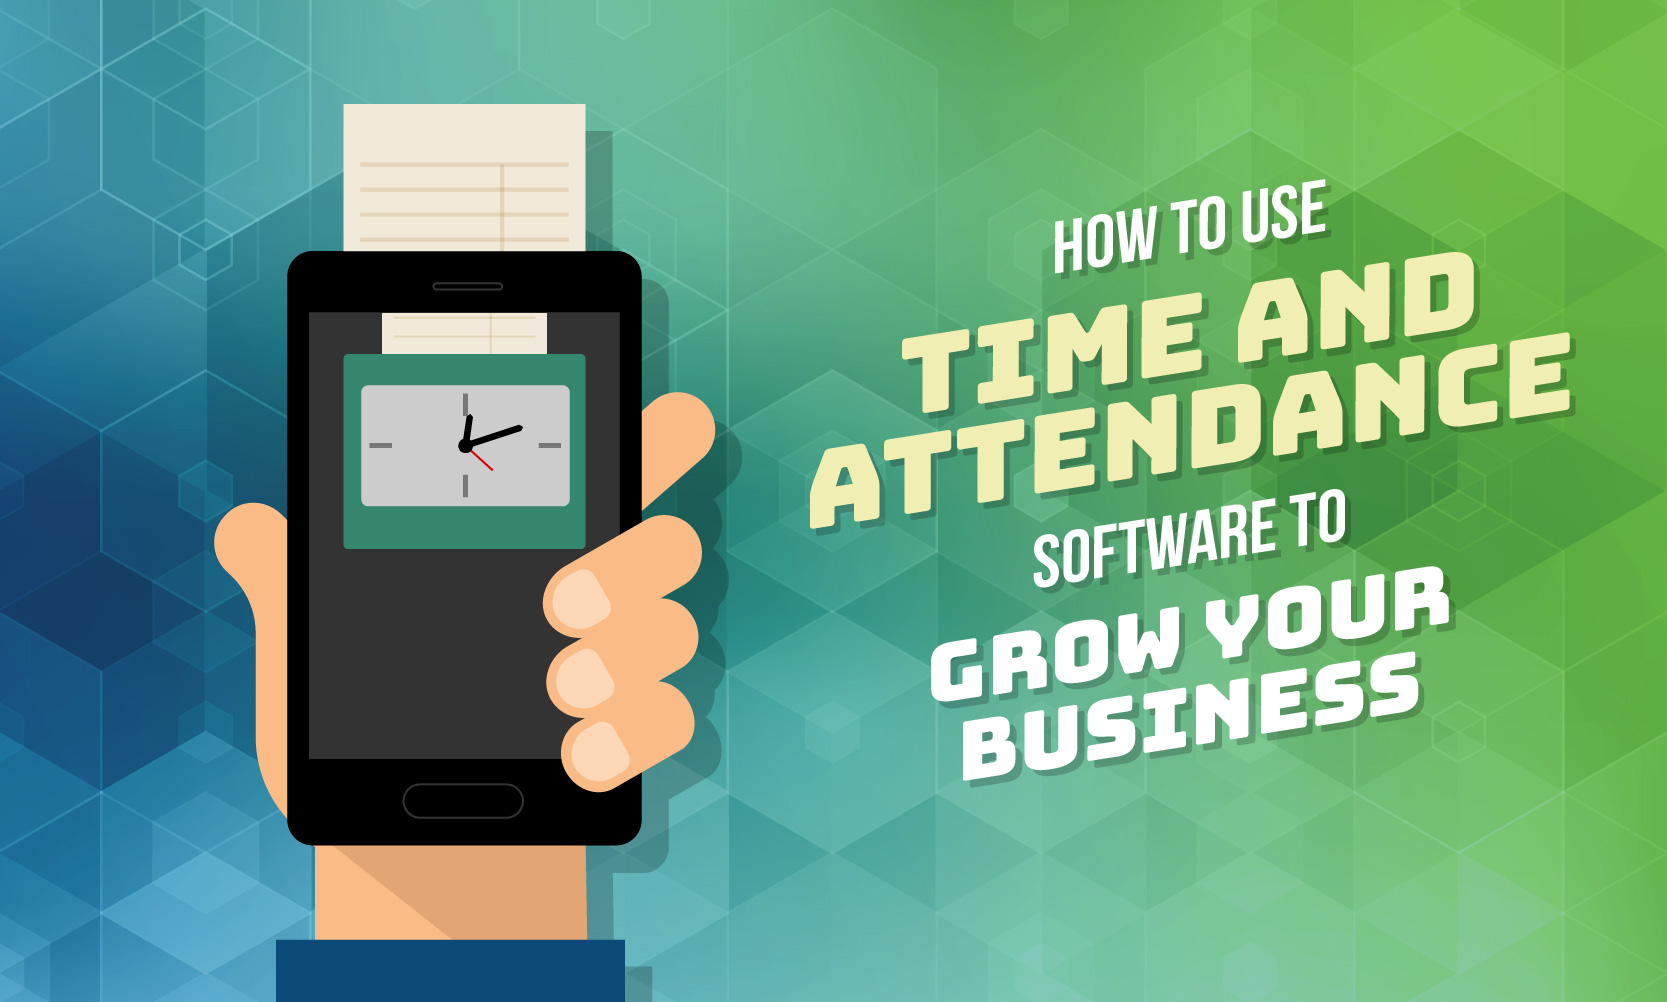 How to Use Time and Attendance Software to Grow Your Business